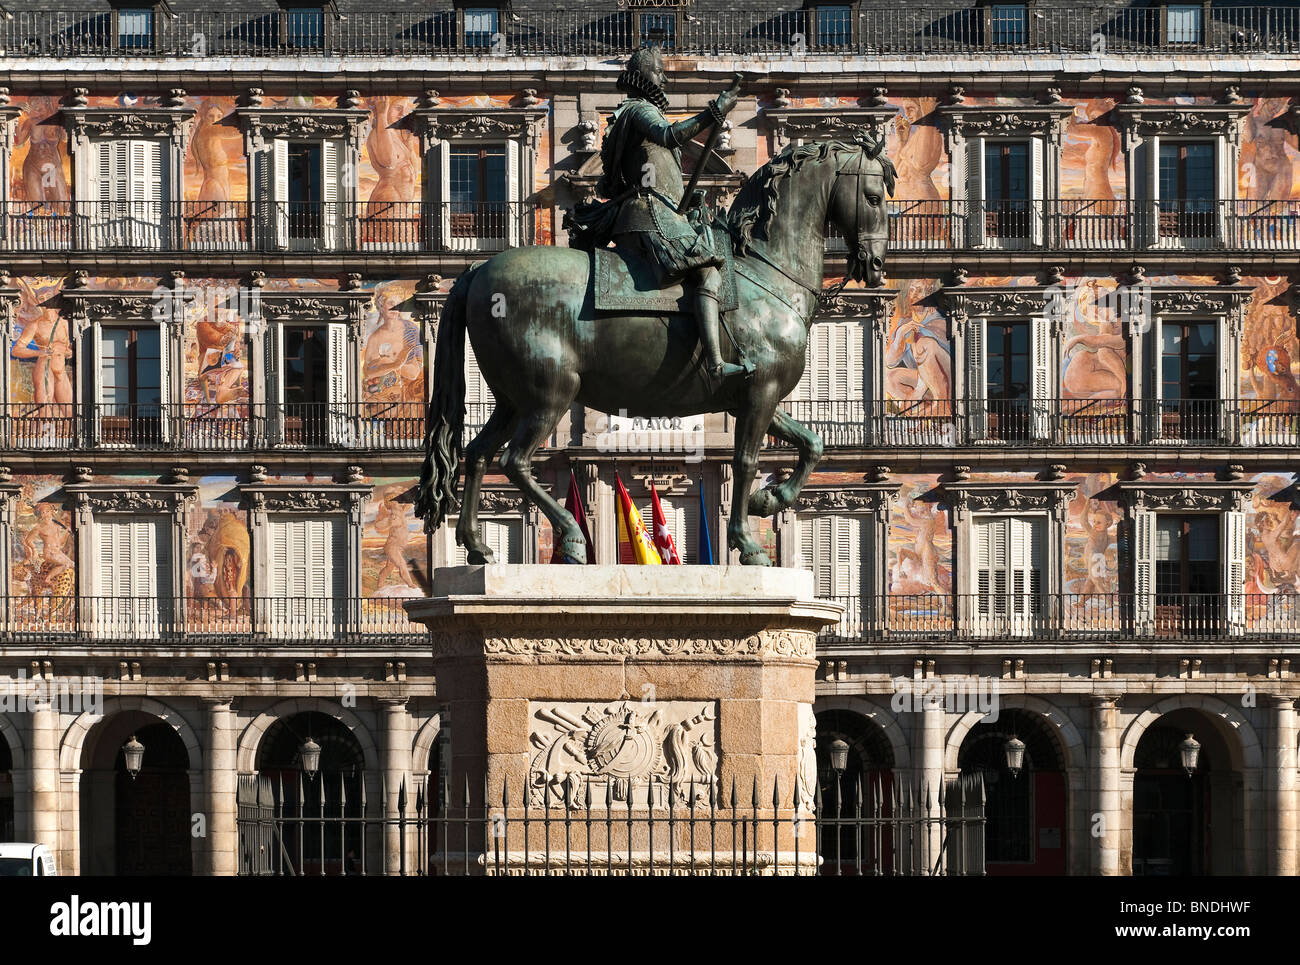 Statue of Philip III with the Casa de la Panaderia in the background in the Plaza Mayor, central Madrid, Spain. Stock Photo